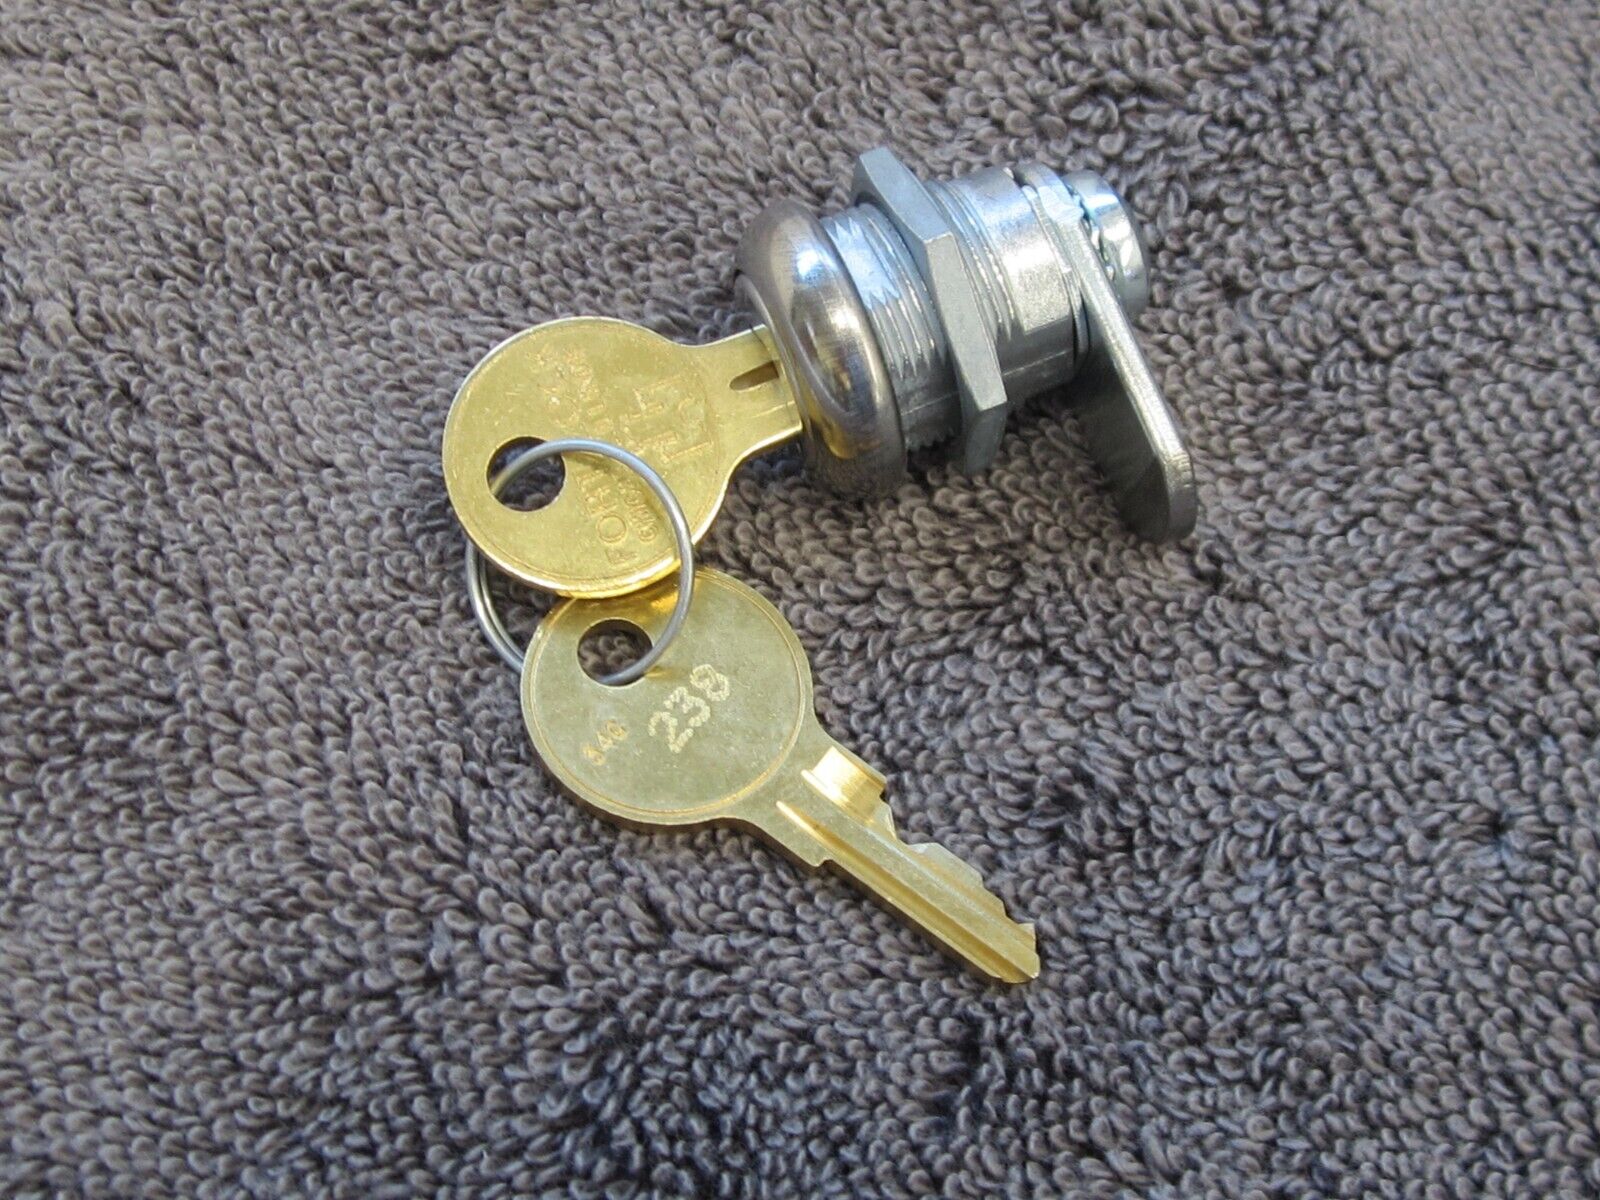 NEW LOCK 2 KEYS for YOUR Duncan FINE-O-METER, parking meter fine collection box